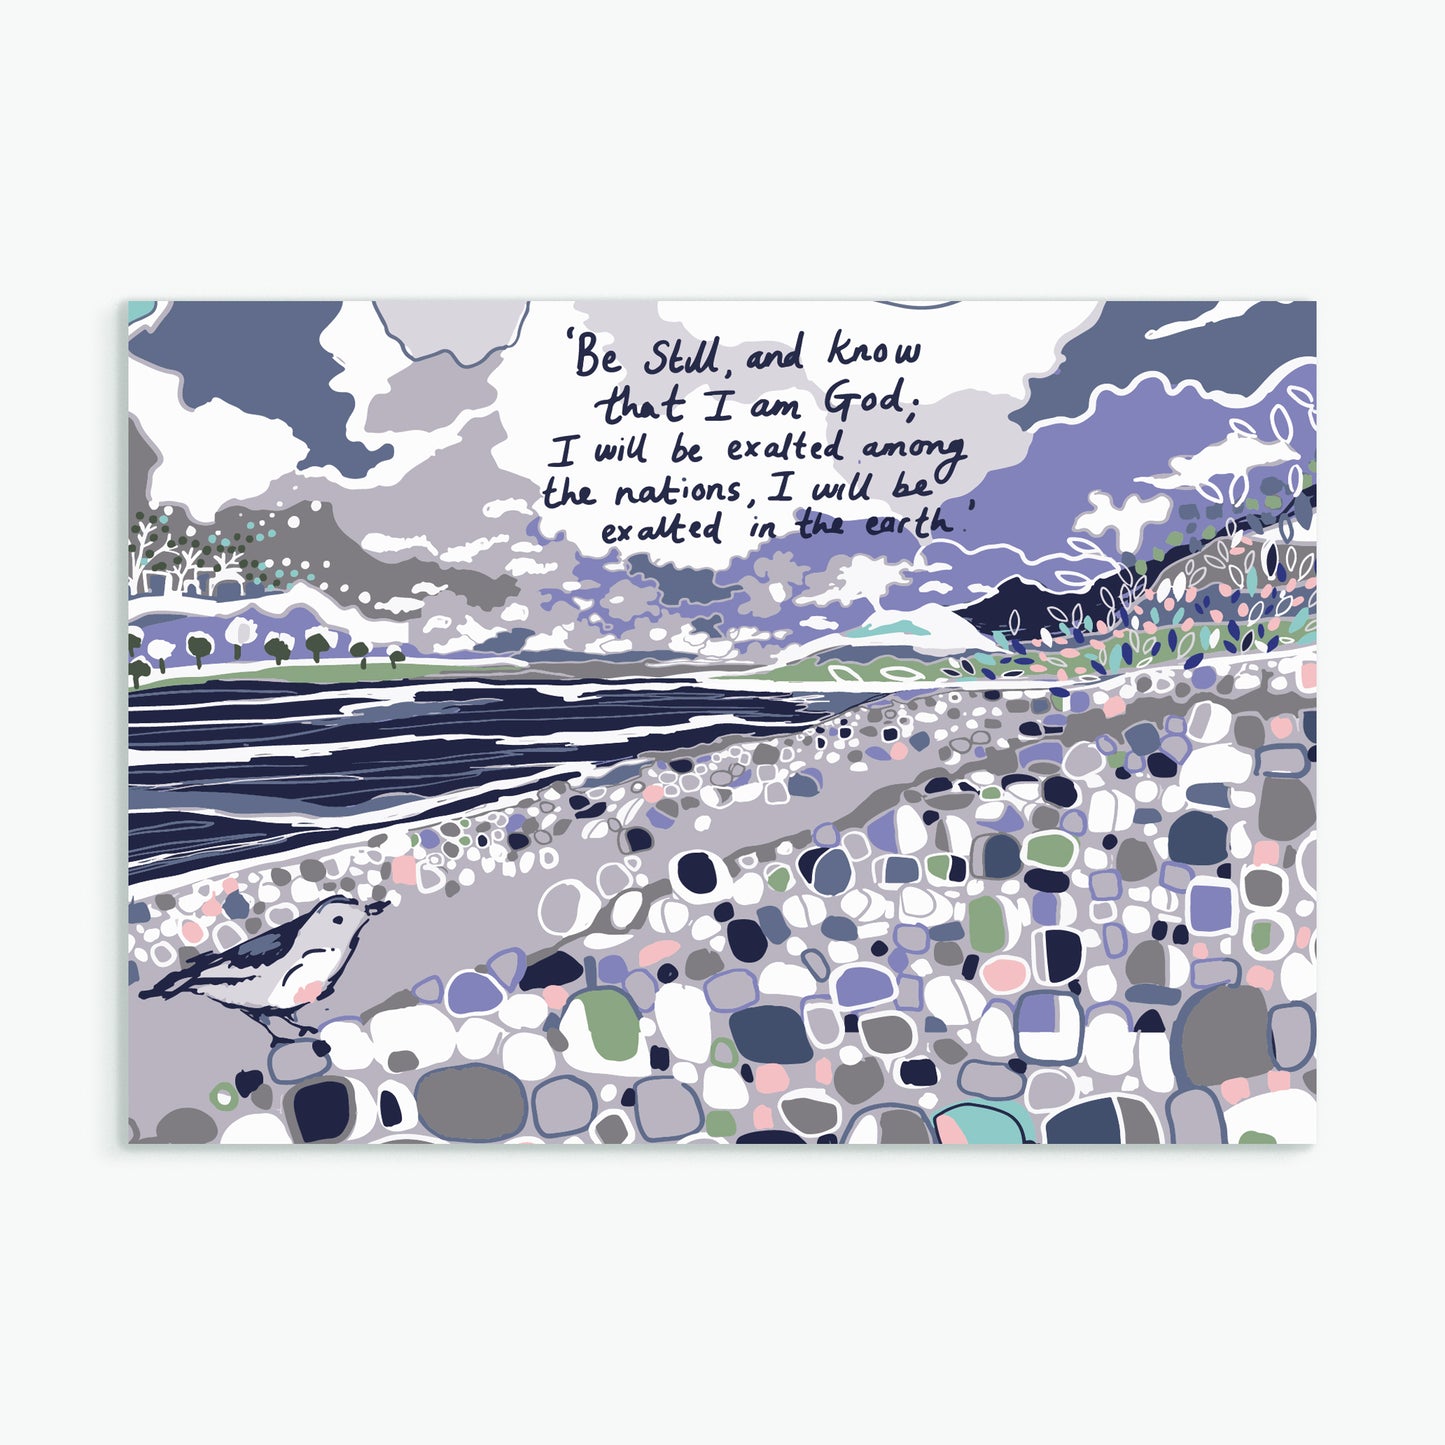 'Story of Stillness'  greeting card by Emily Kelly